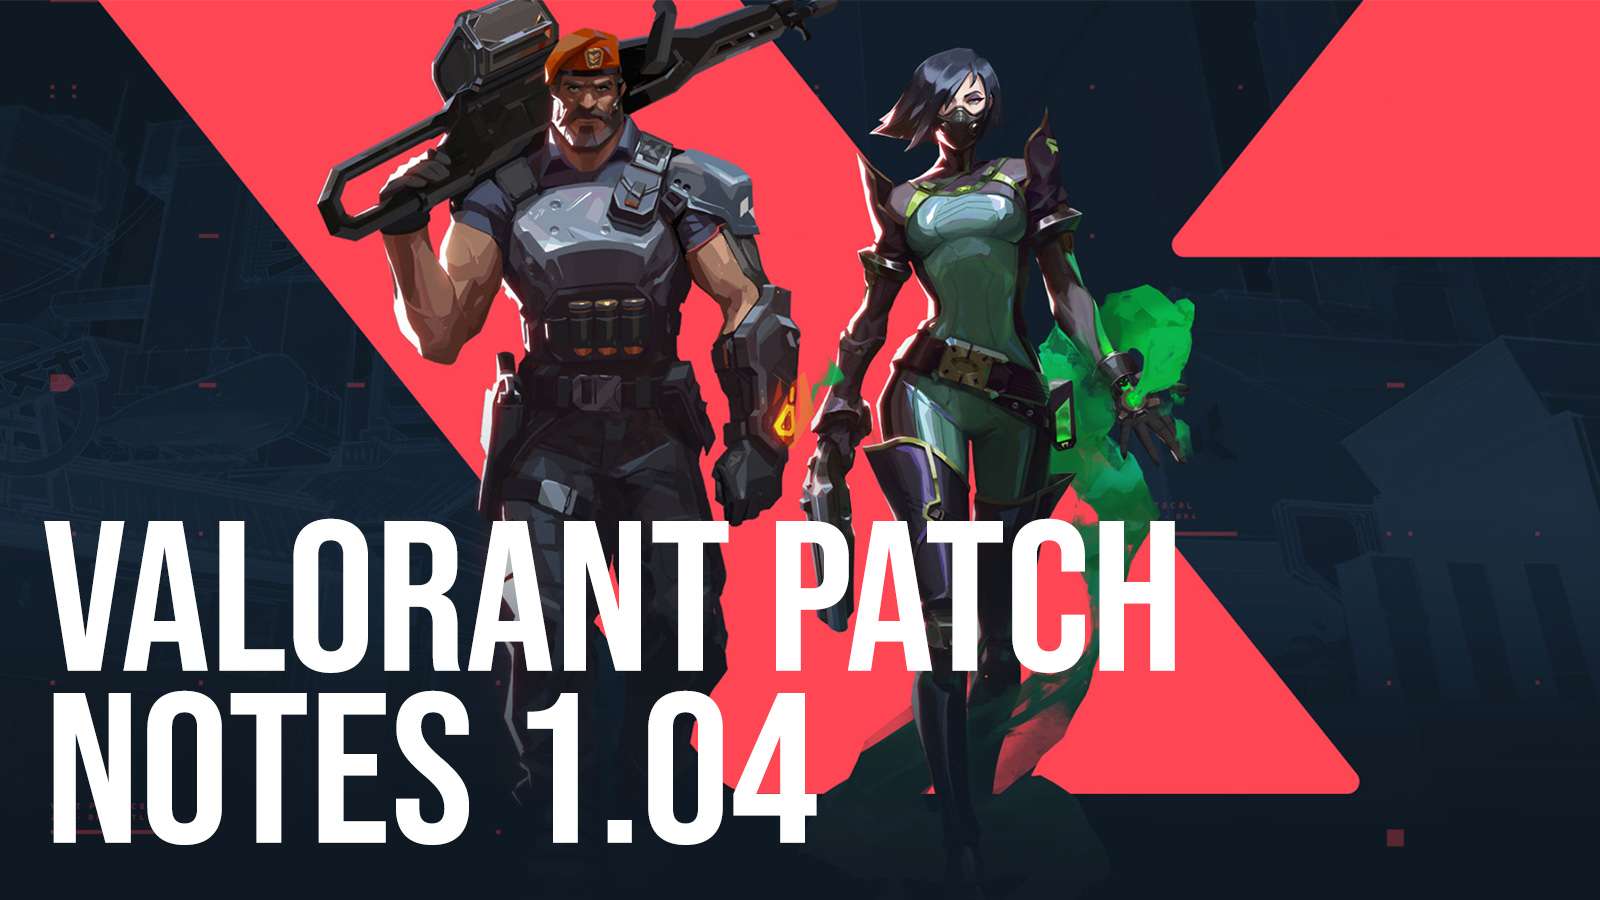 Valorant Patch Notes 1.04